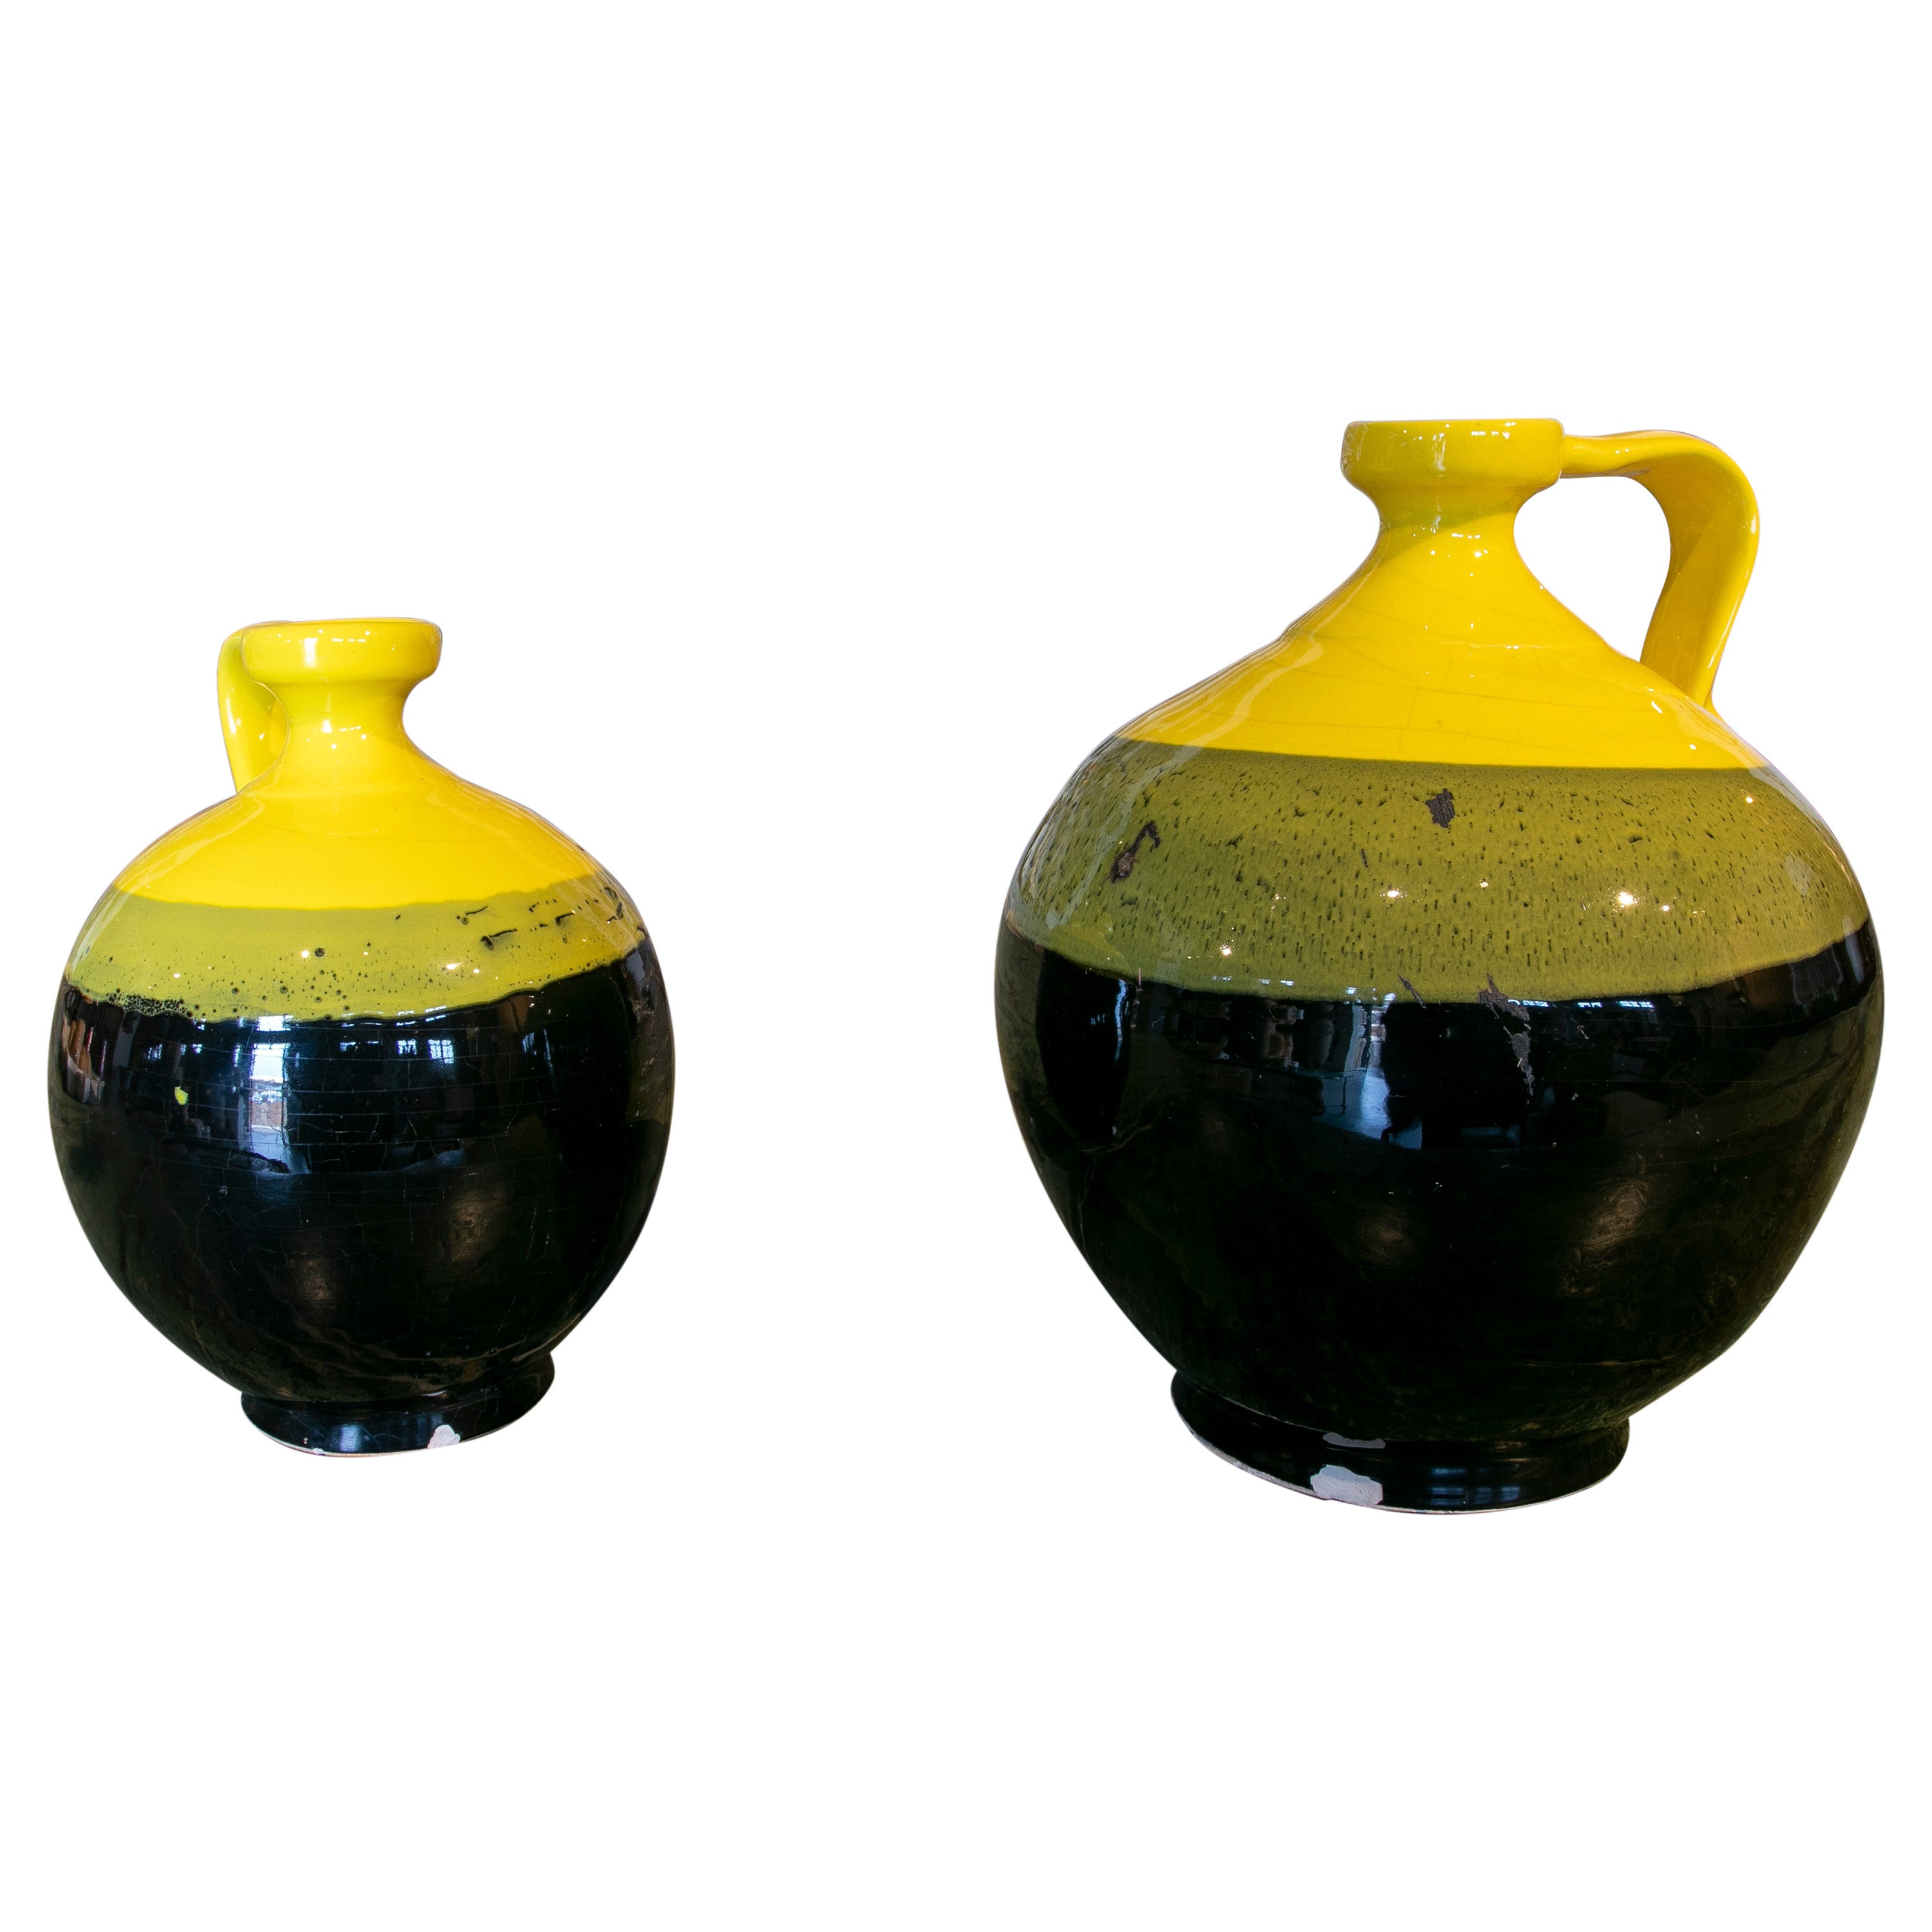 Pair of Spanish Glazed Ceramic Jug with Handle in Tones of Black and Yellow